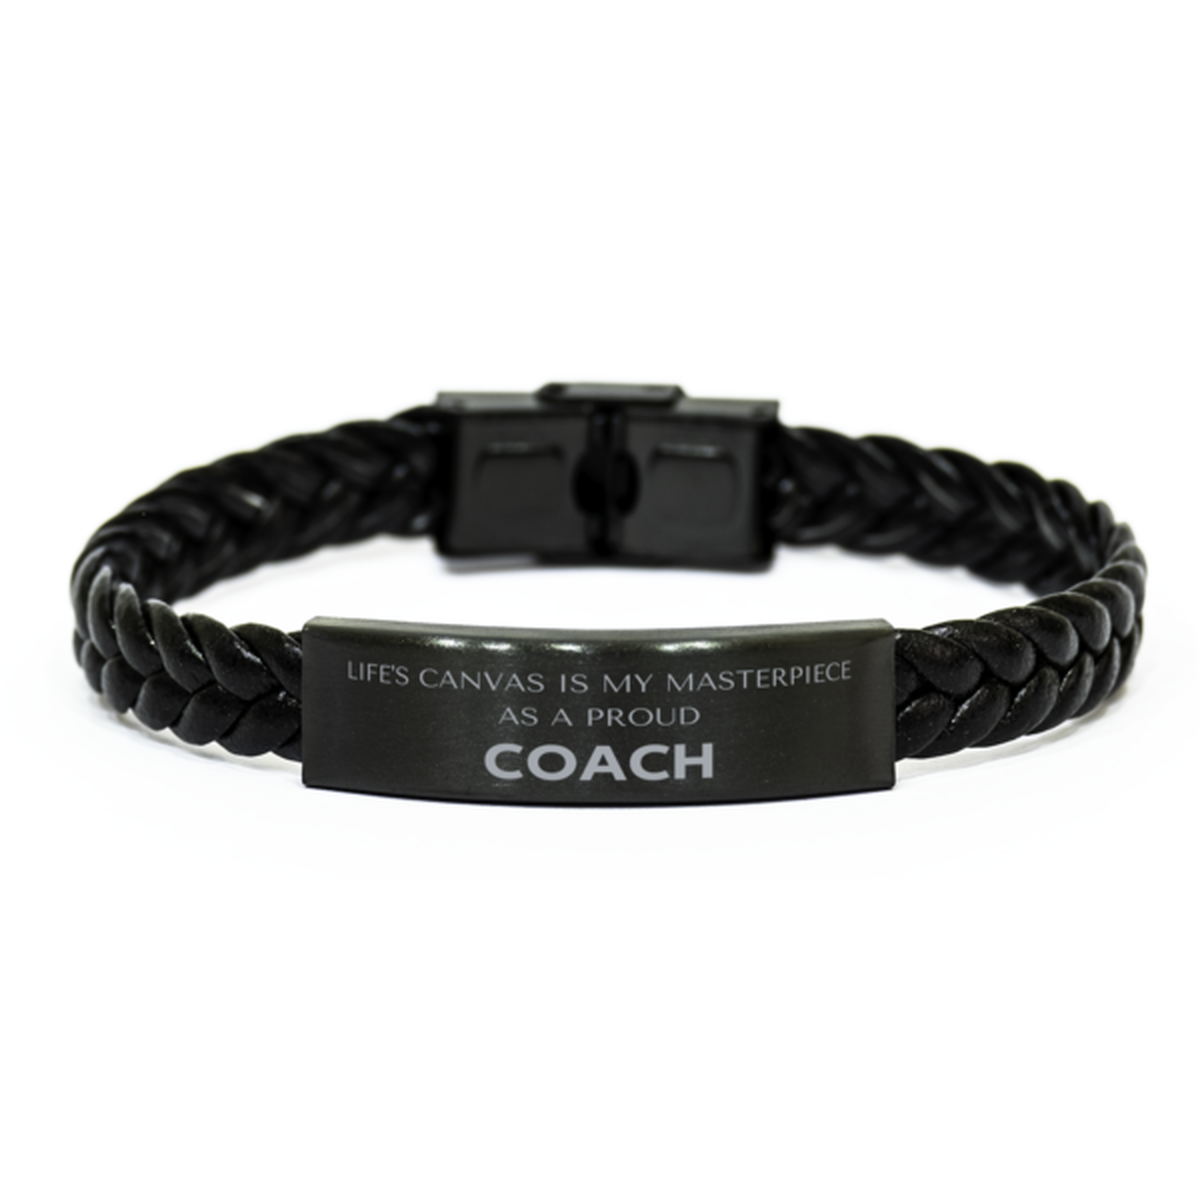 Proud Coach Gifts, Life's canvas is my masterpiece, Epic Birthday Christmas Unique Braided Leather Bracelet For Coach, Coworkers, Men, Women, Friends